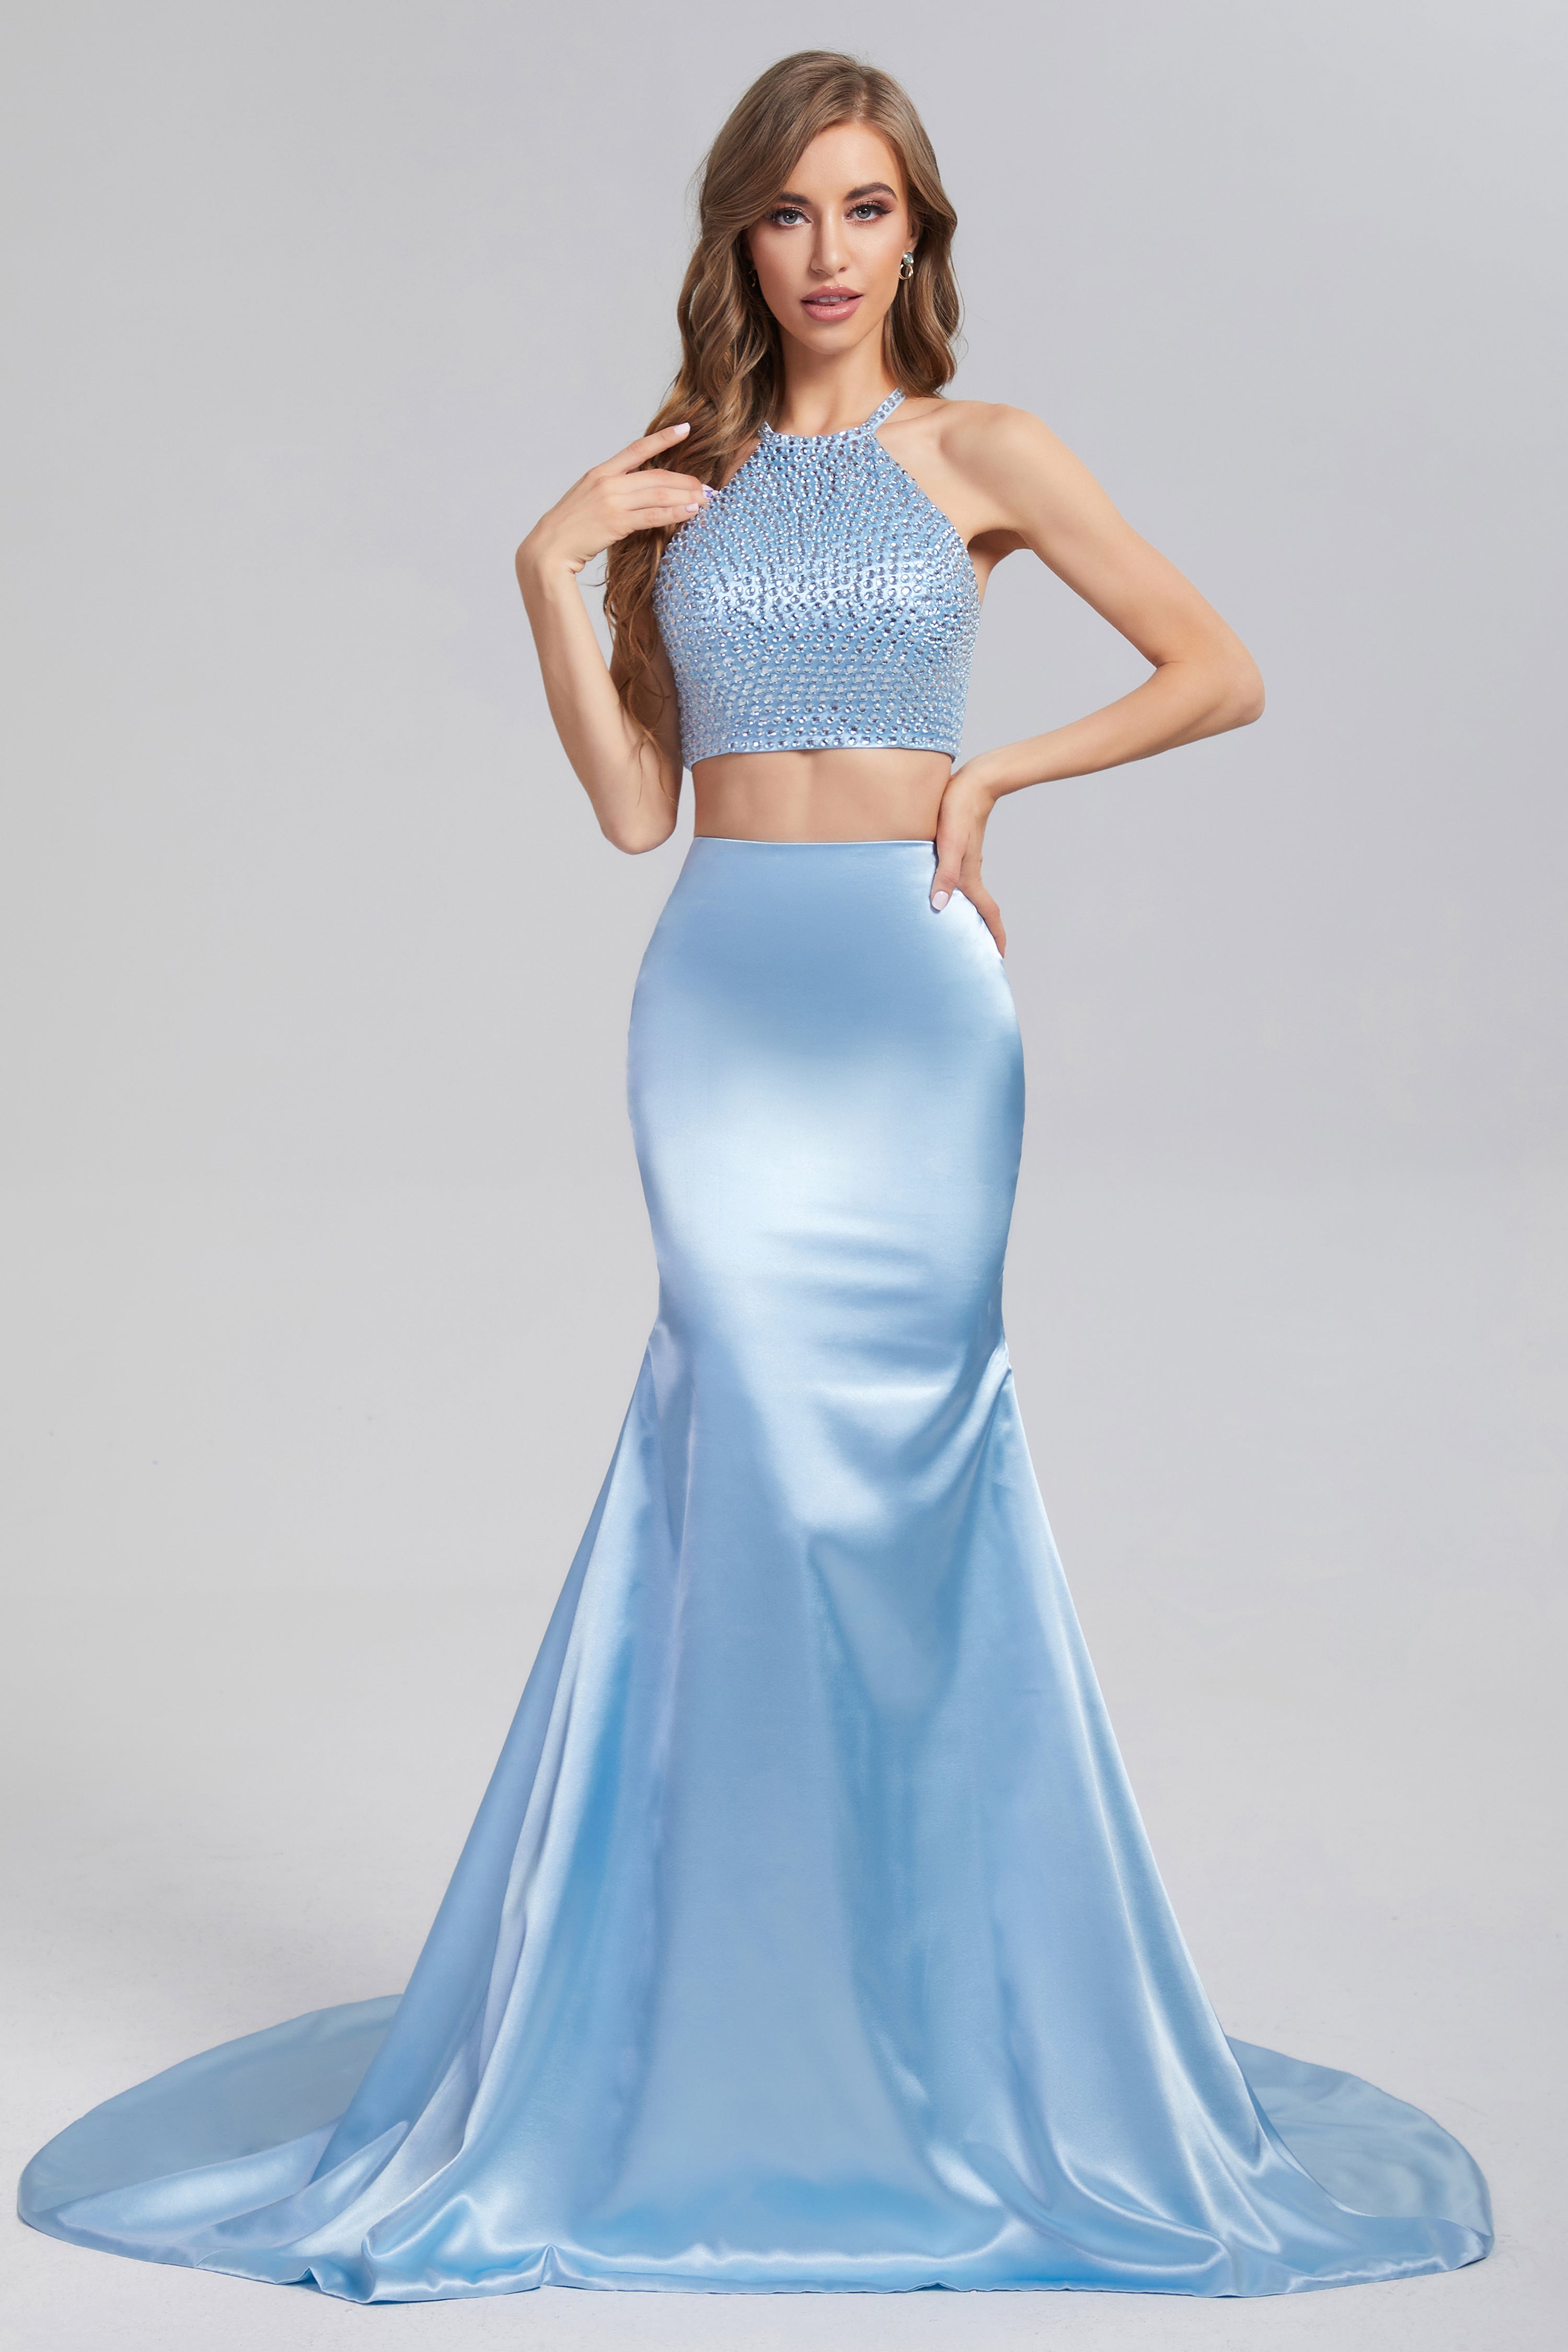 Mermaid 2-Piece Beading Prom Dresses with Trailing